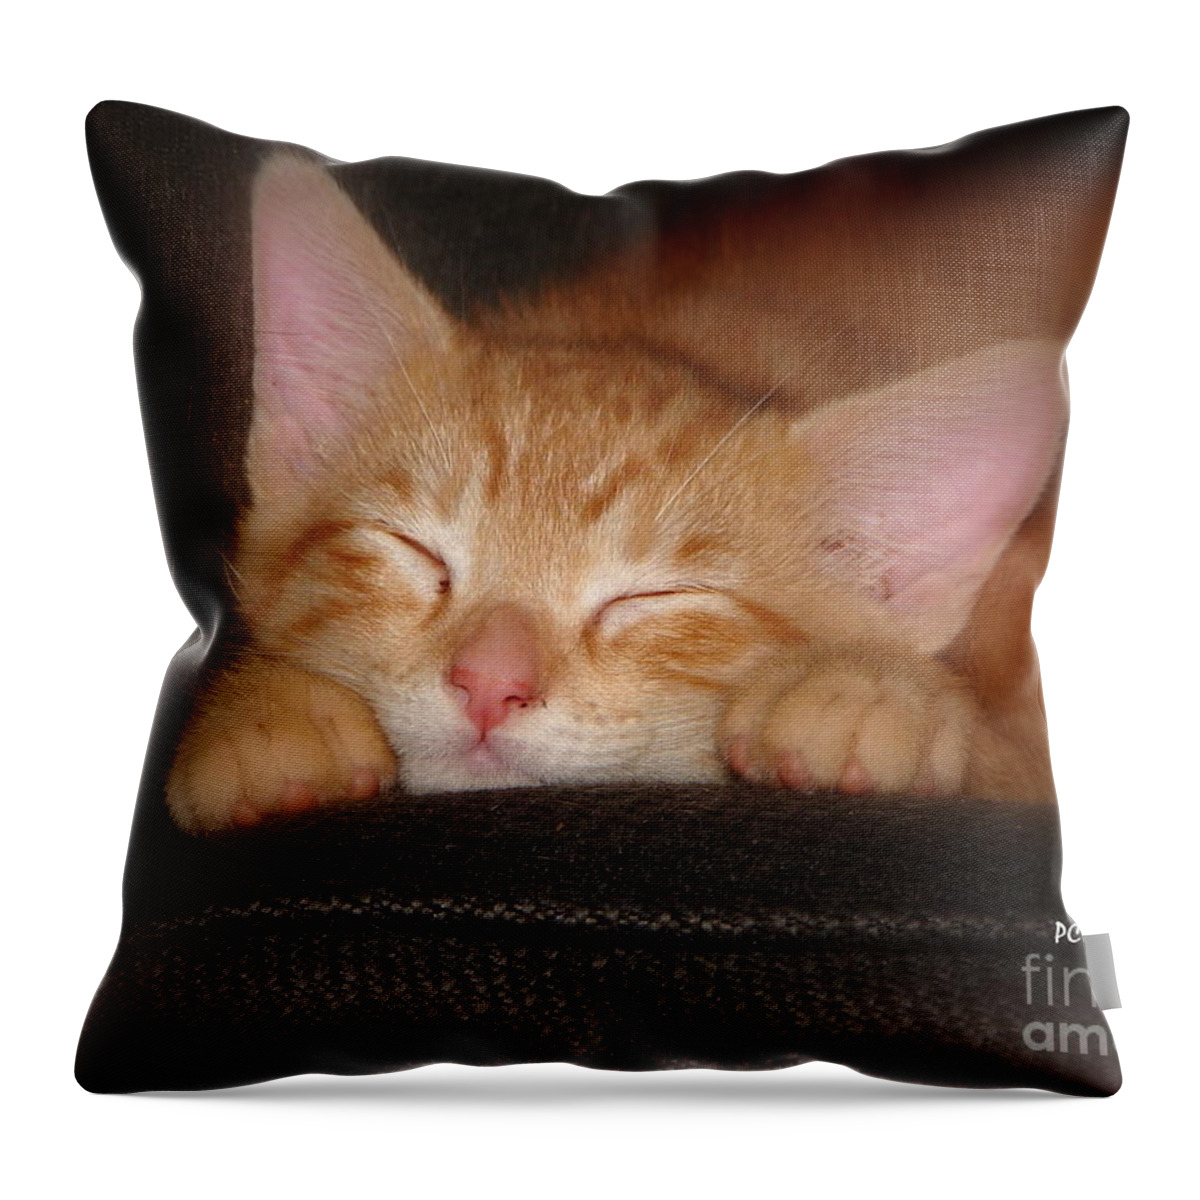 Cat Throw Pillow featuring the photograph Dreaming Kitten by Patrick Witz